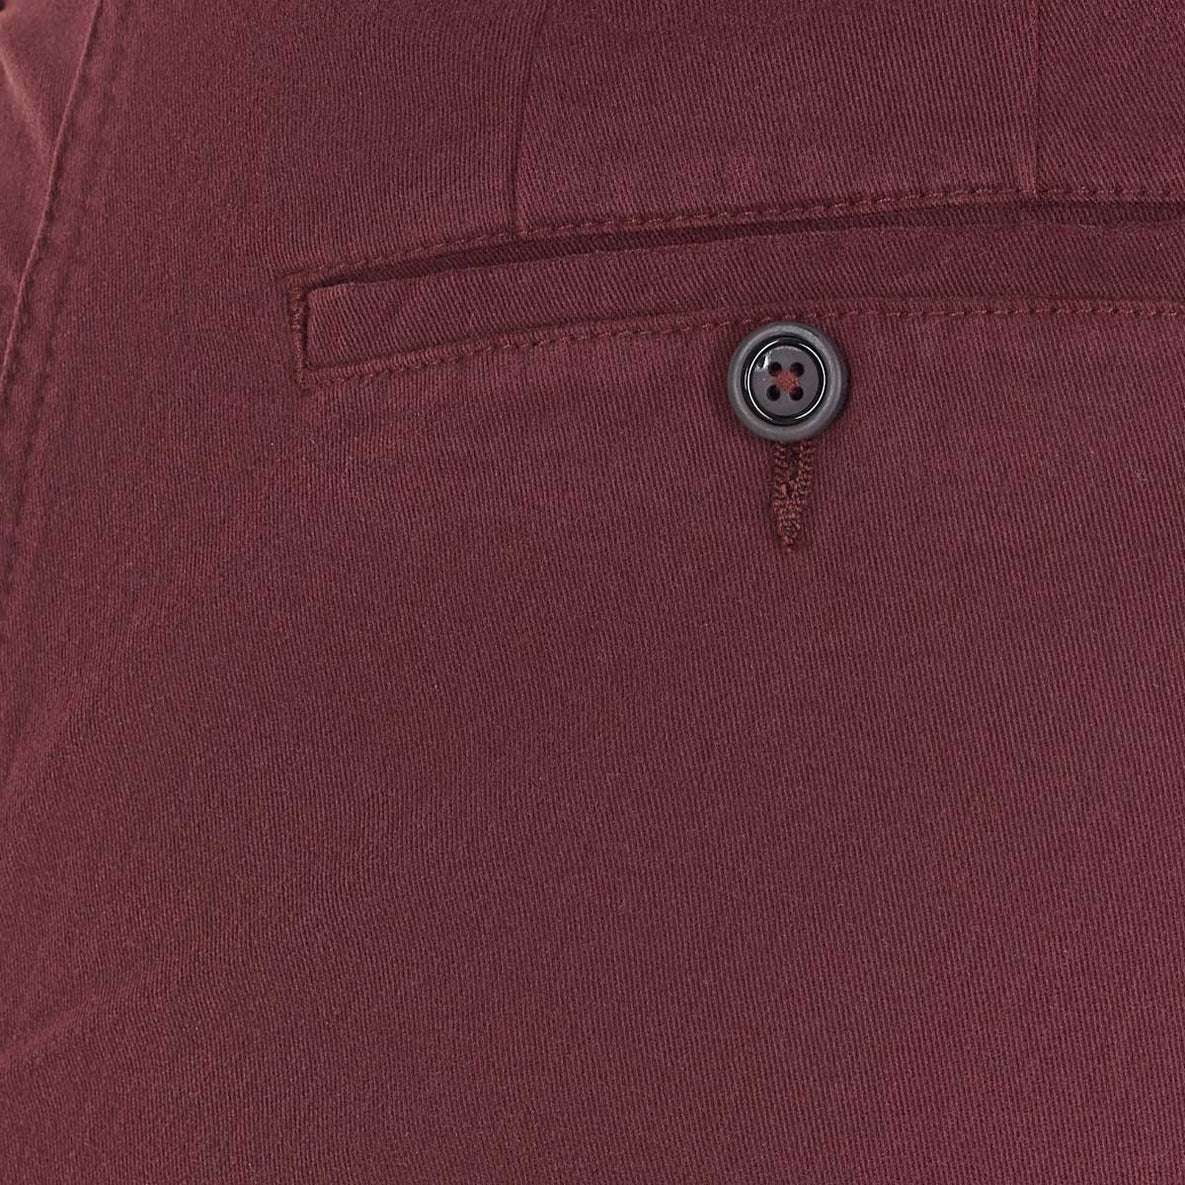 GURTEEN Trousers - Longford Spring Stretch Cotton Chinos - Cranberry